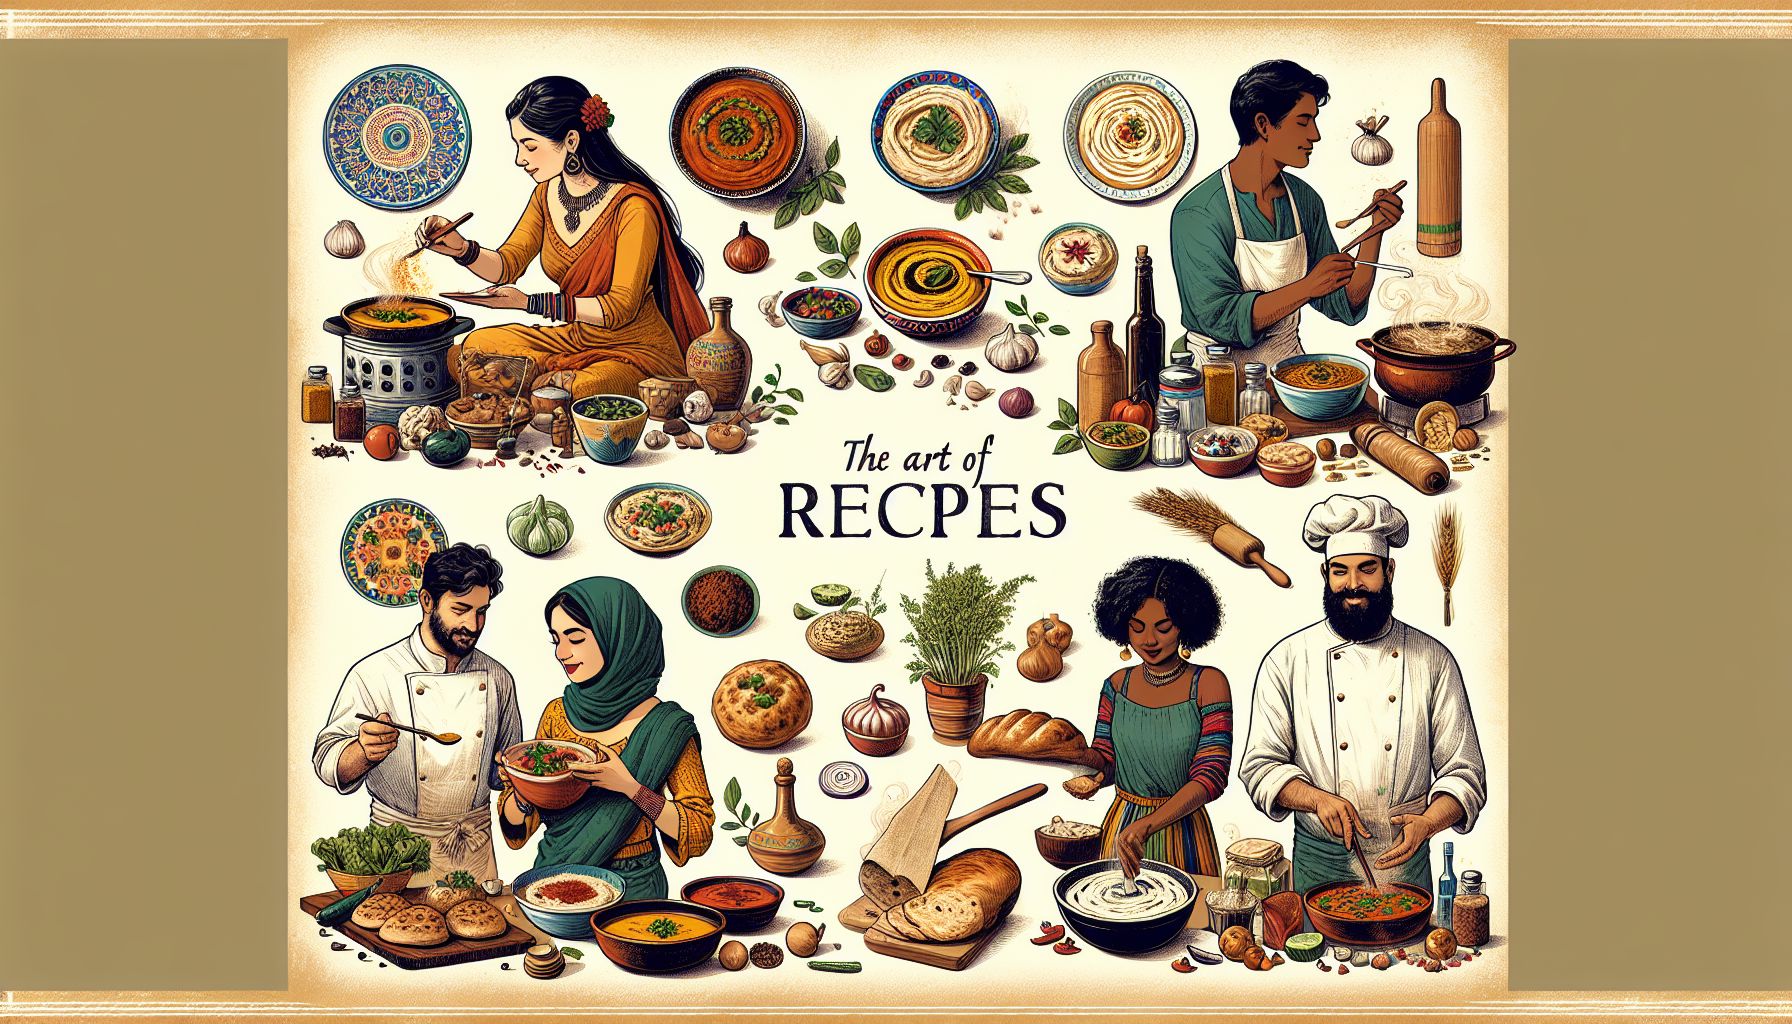 The Art of Recipes: Exploring the Stories and Traditions Behind Dishes